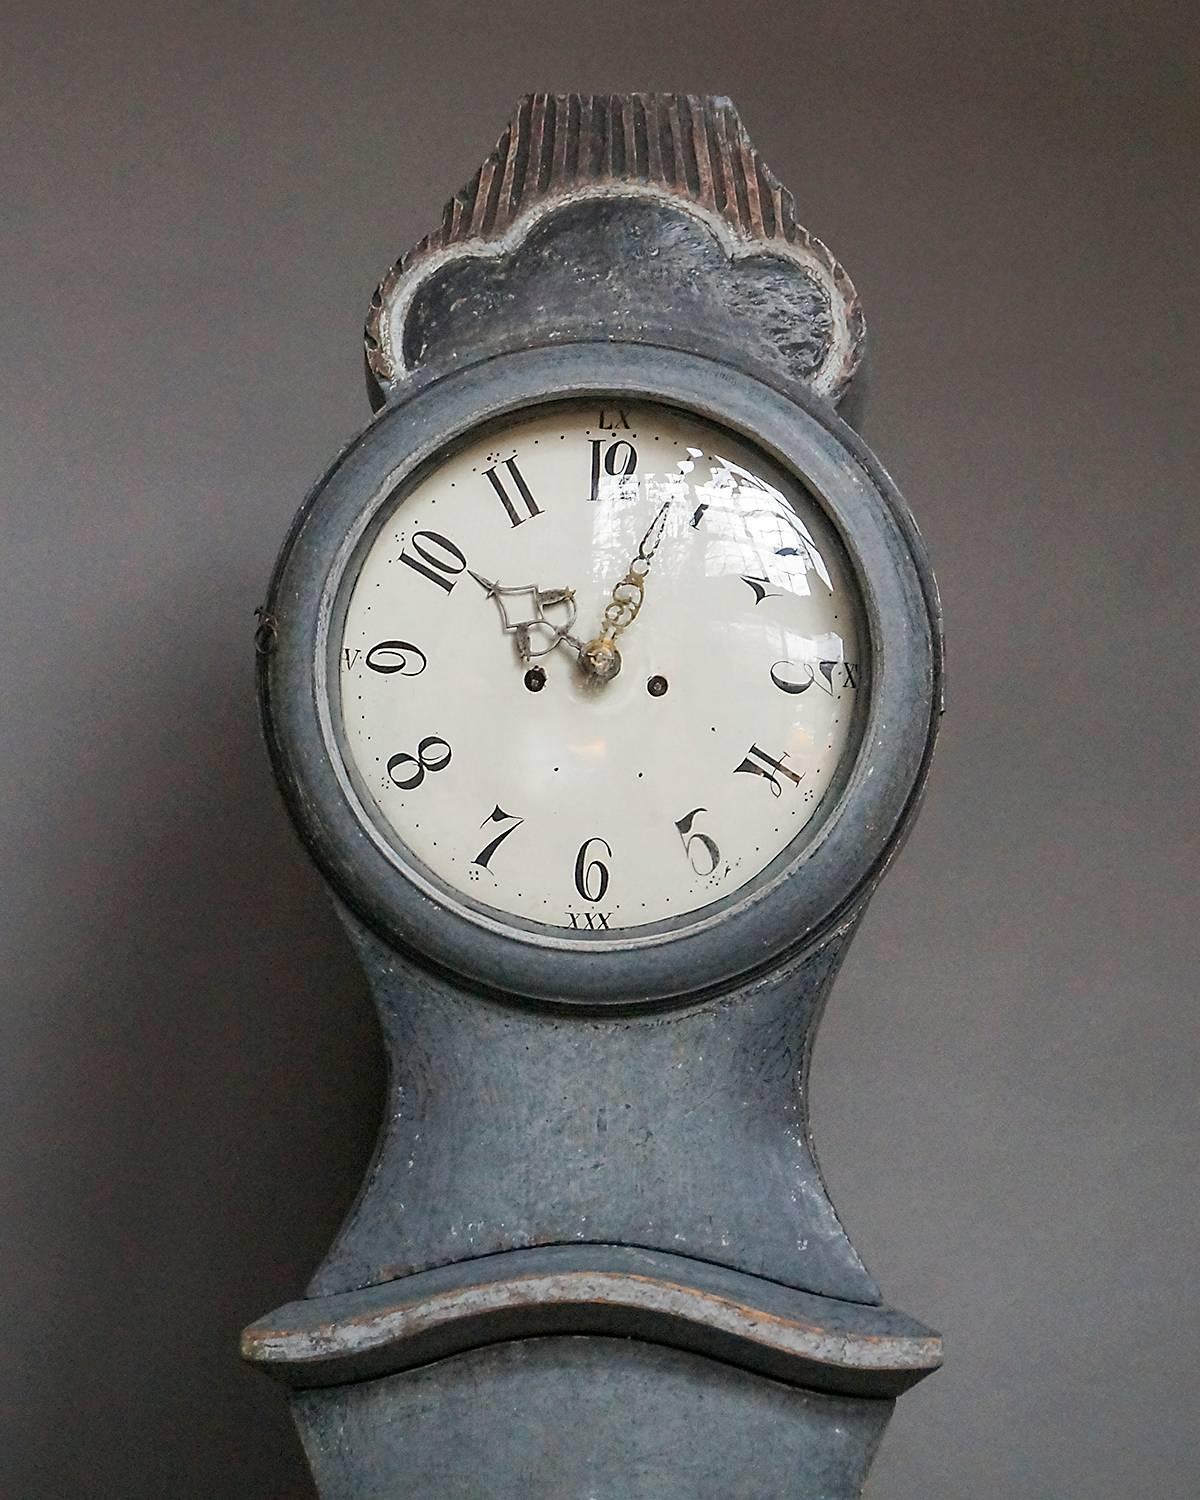 Swedish tall case clock in original paint by the artist and carver Sven Nilsson Morin, circa 1810. Morin was a crofter’s son (1747–1813) who carved altarpieces and painted churches throughout Småland in addition to clock cases.

The original clock